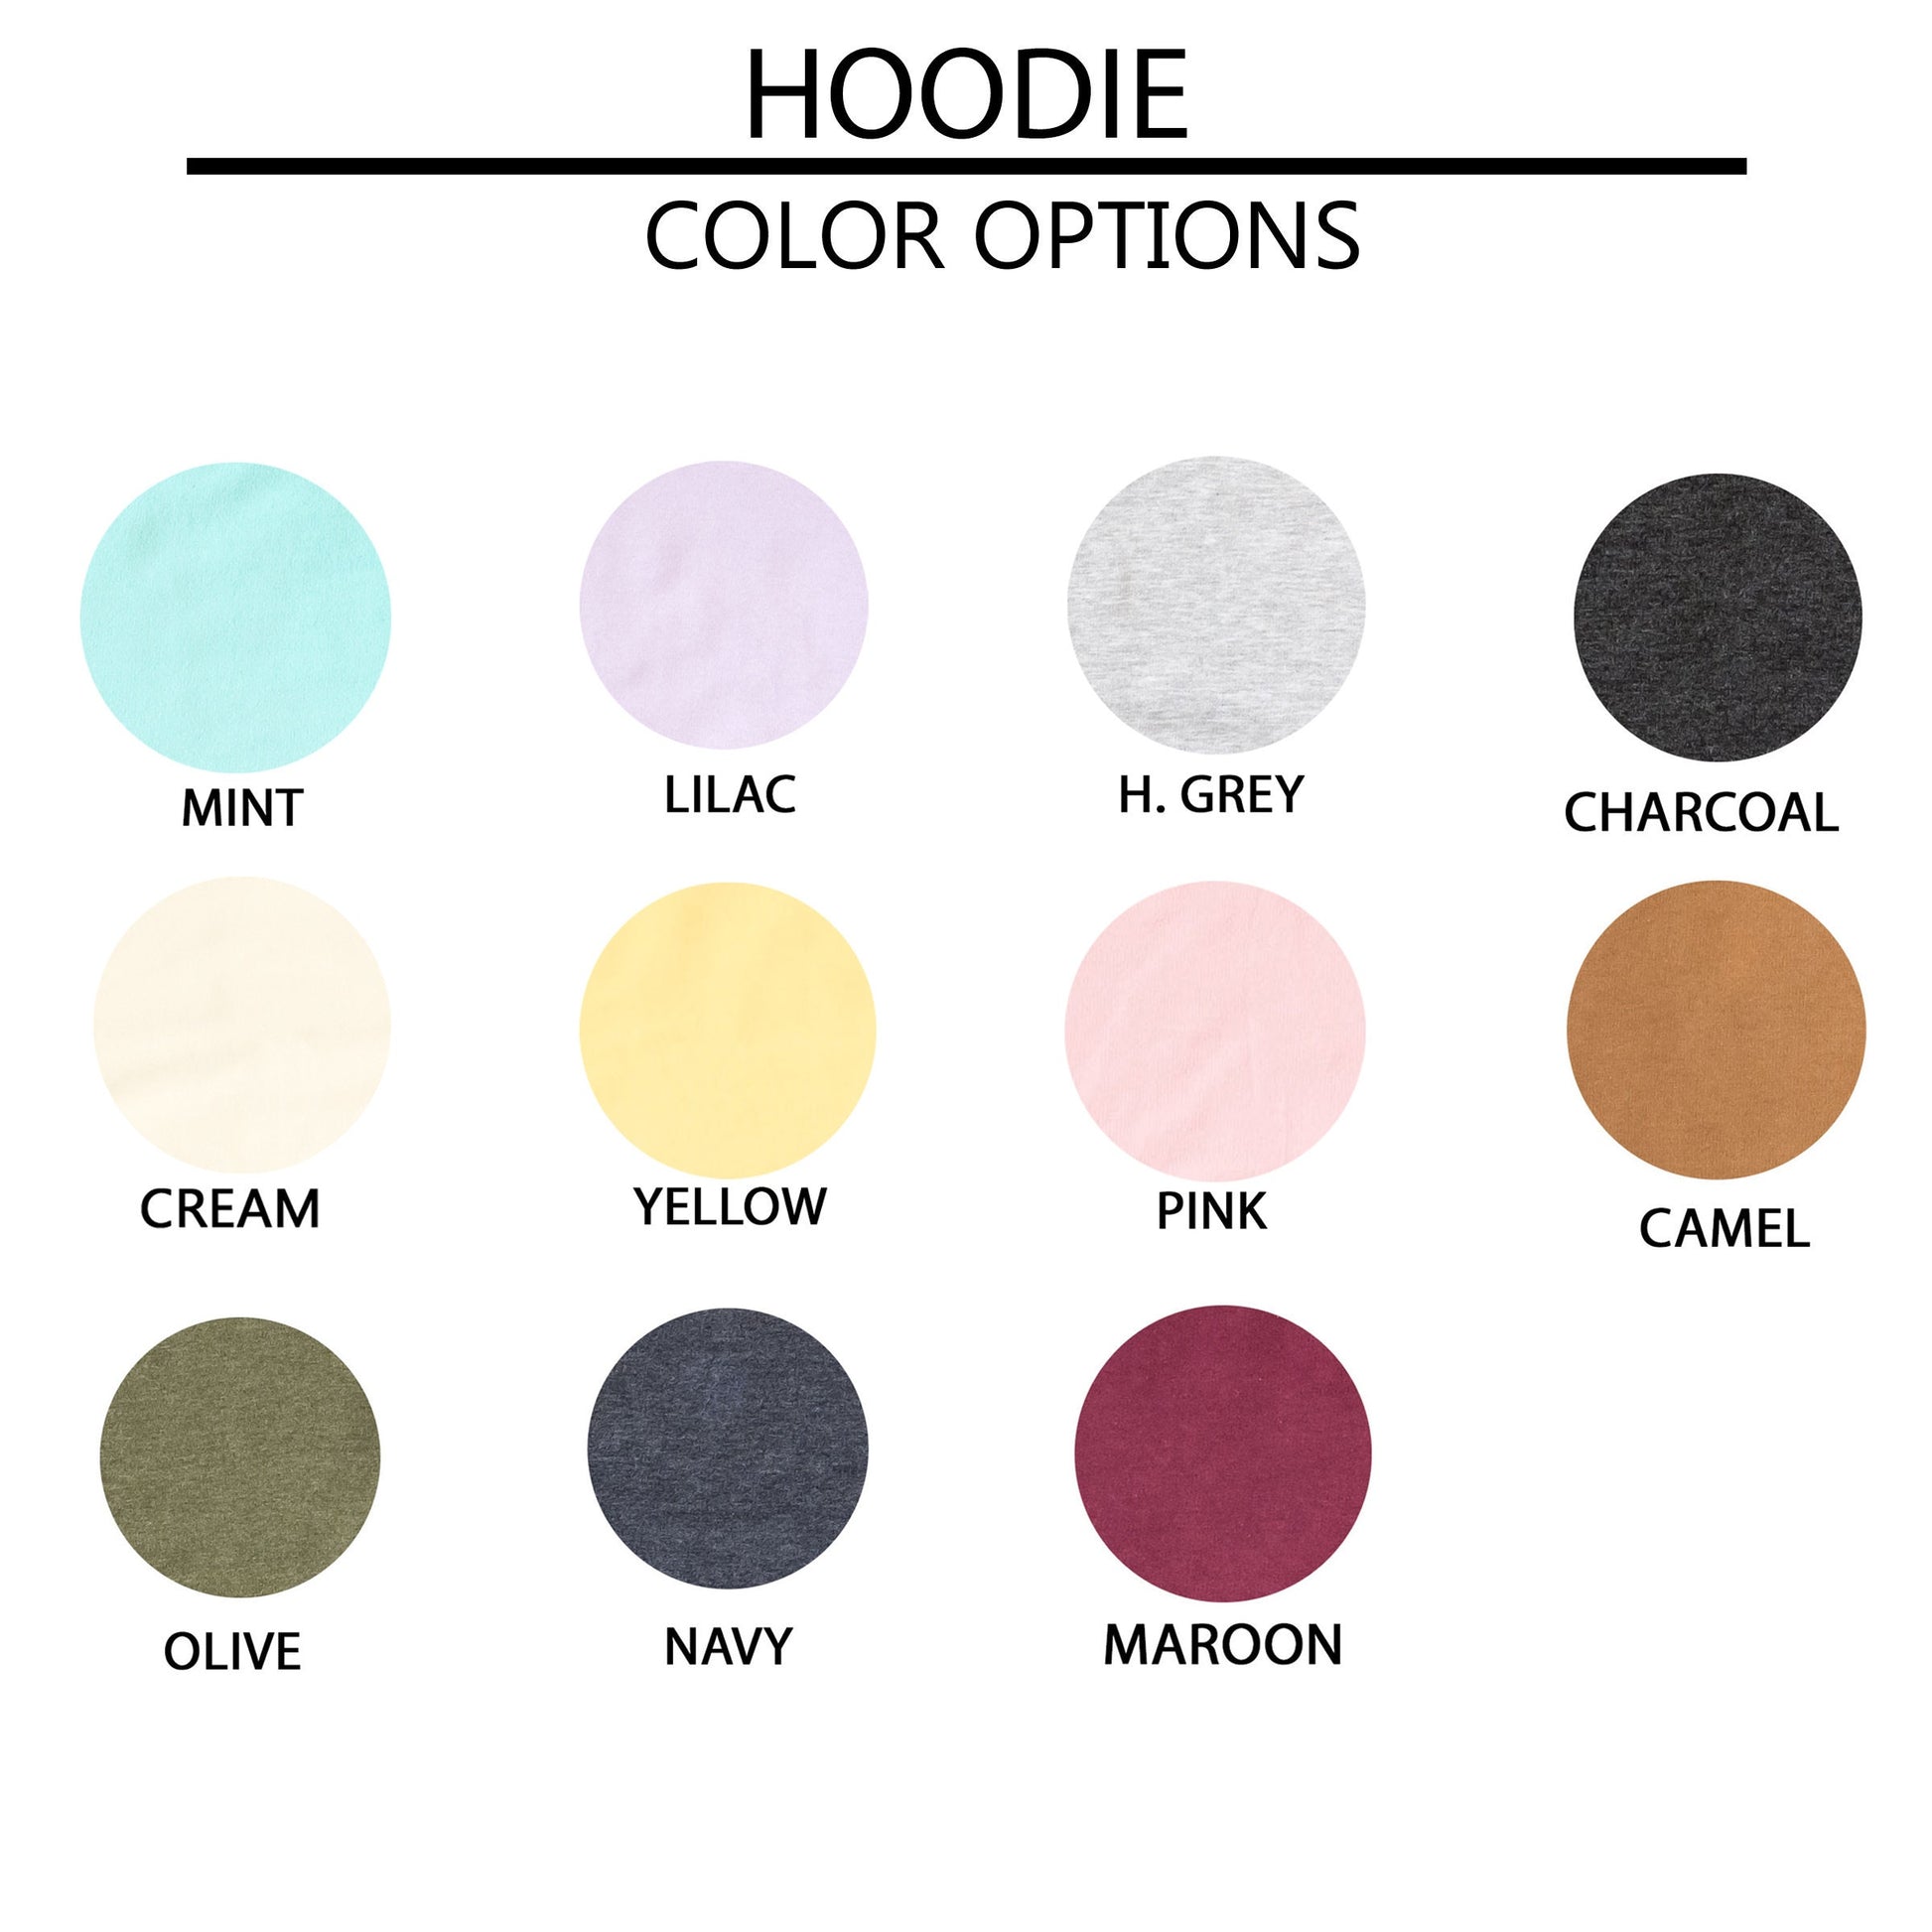 a color chart for the hoodie color options